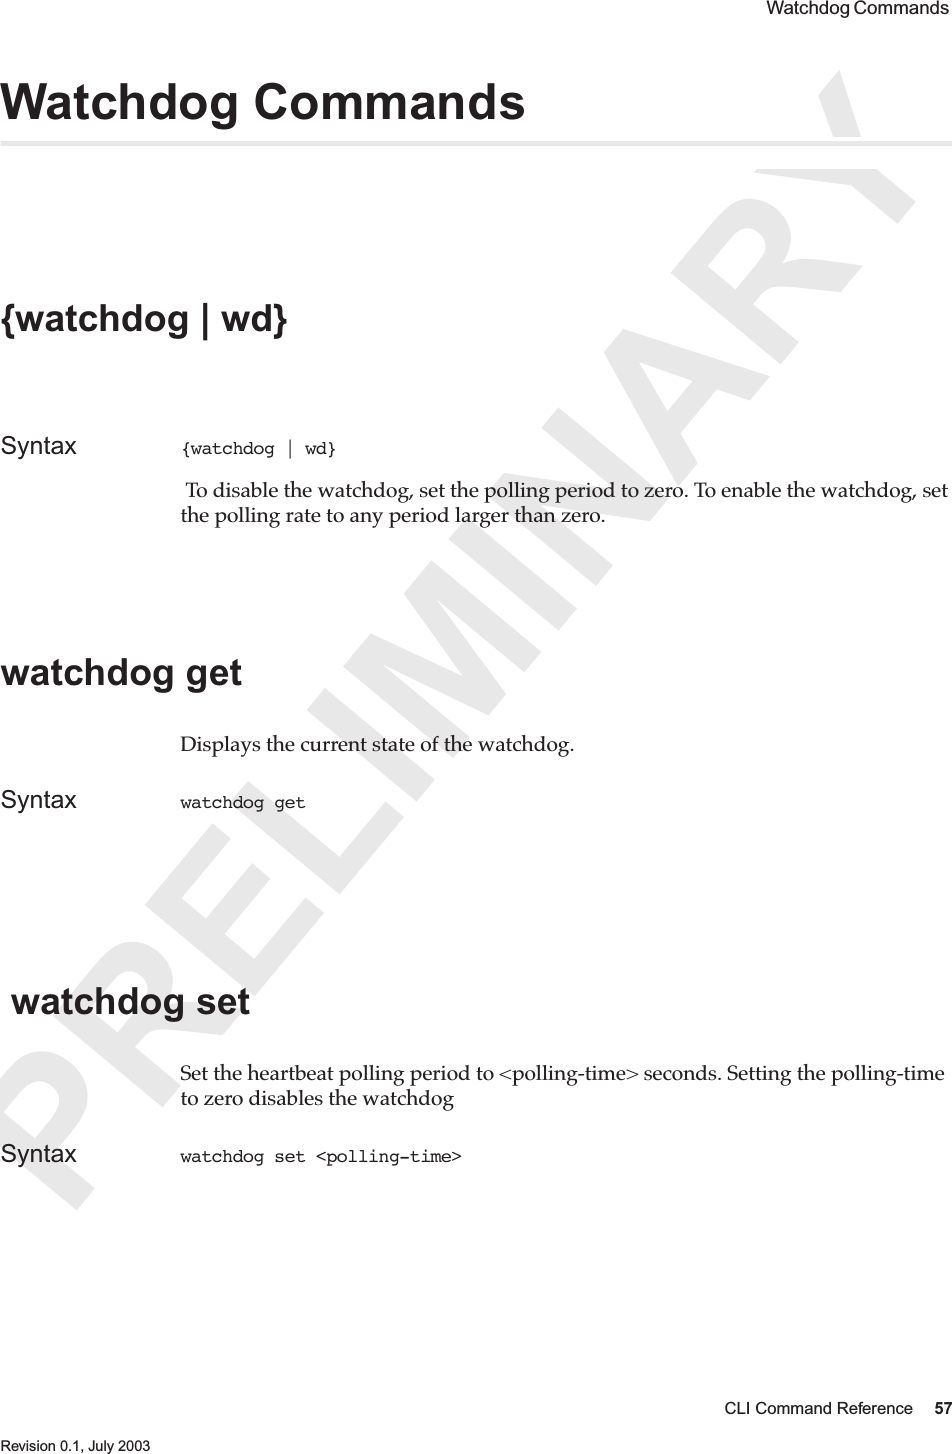 PRELIMINARYCLI Command Reference 57 Revision 0.1, July 2003 Watchdog Commands Watchdog Commands {watchdog | wd} Syntax {watchdog | wd}  To disable the watchdog, set the polling period to zero. To enable the watchdog, set the polling rate to any period larger than zero.watchdog get Displays the current state of the watchdog.Syntax watchdog get  watchdog set Set the heartbeat polling period to &lt;polling-time&gt; seconds. Setting the polling-time to zero disables the watchdogSyntax watchdog set &lt;polling-time&gt;